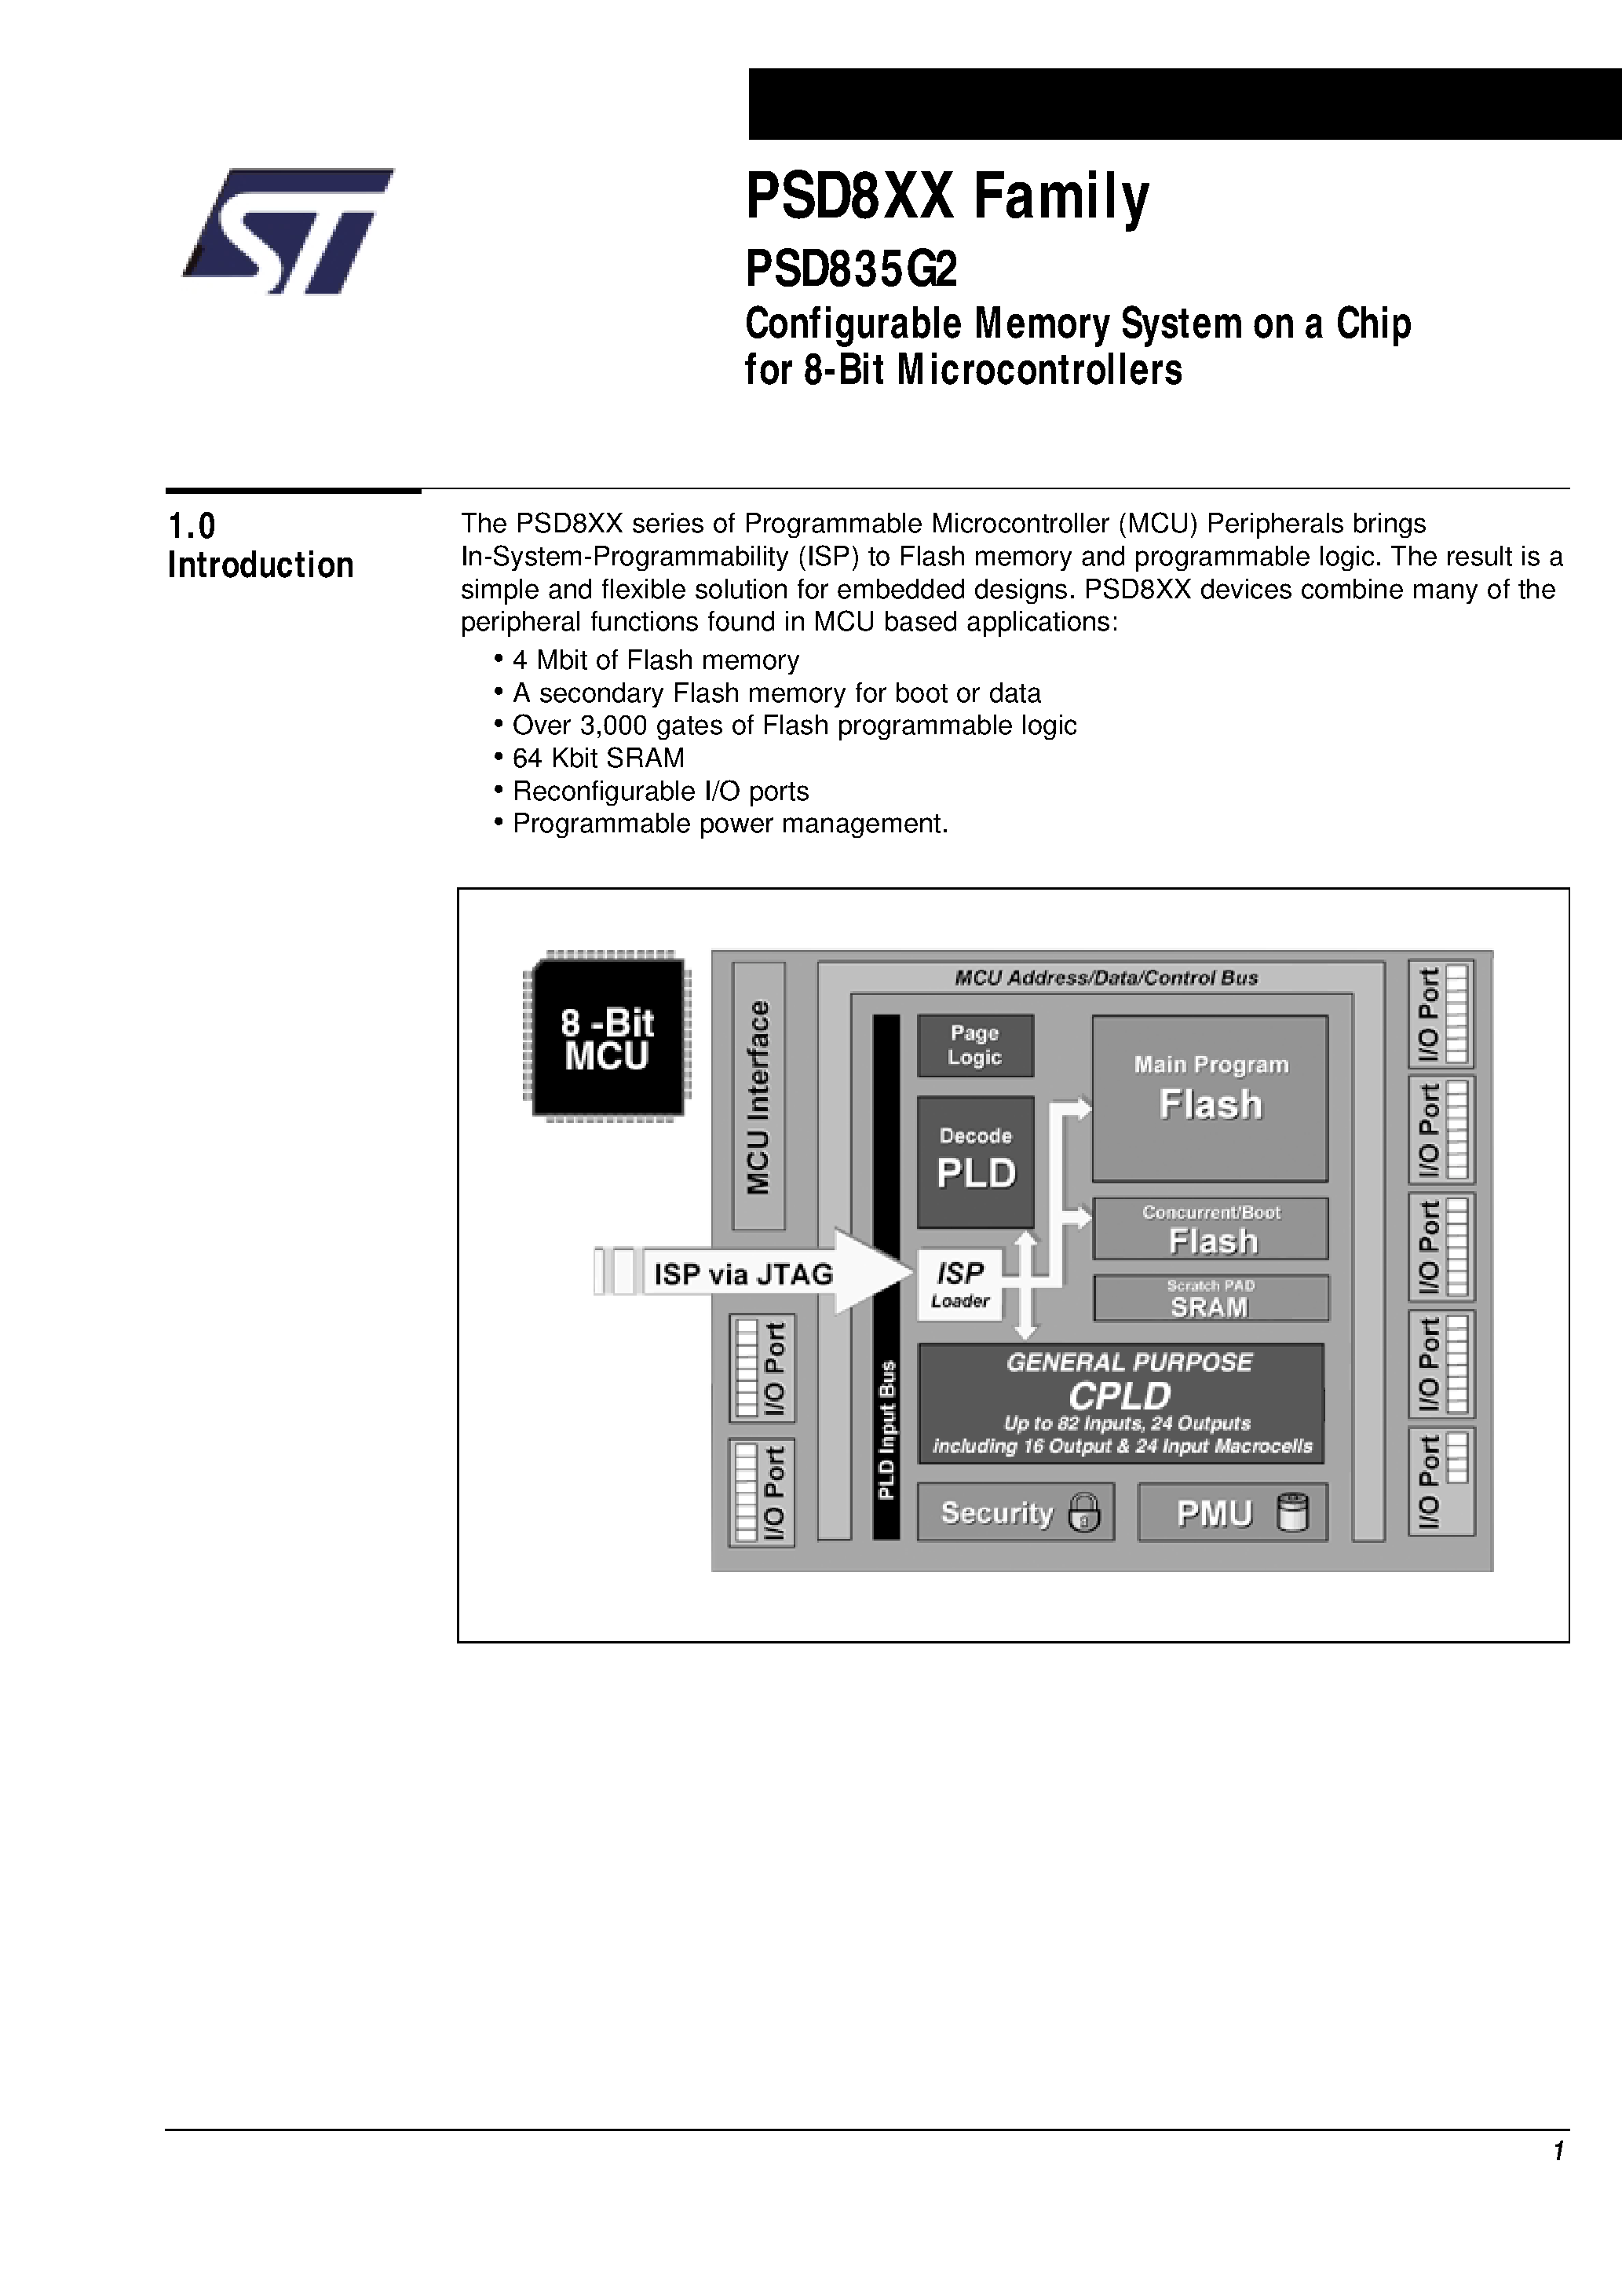 Datasheet PSD835F2-A-15JI - Configurable Memory System on a Chip for 8-Bit Microcontrollers page 2